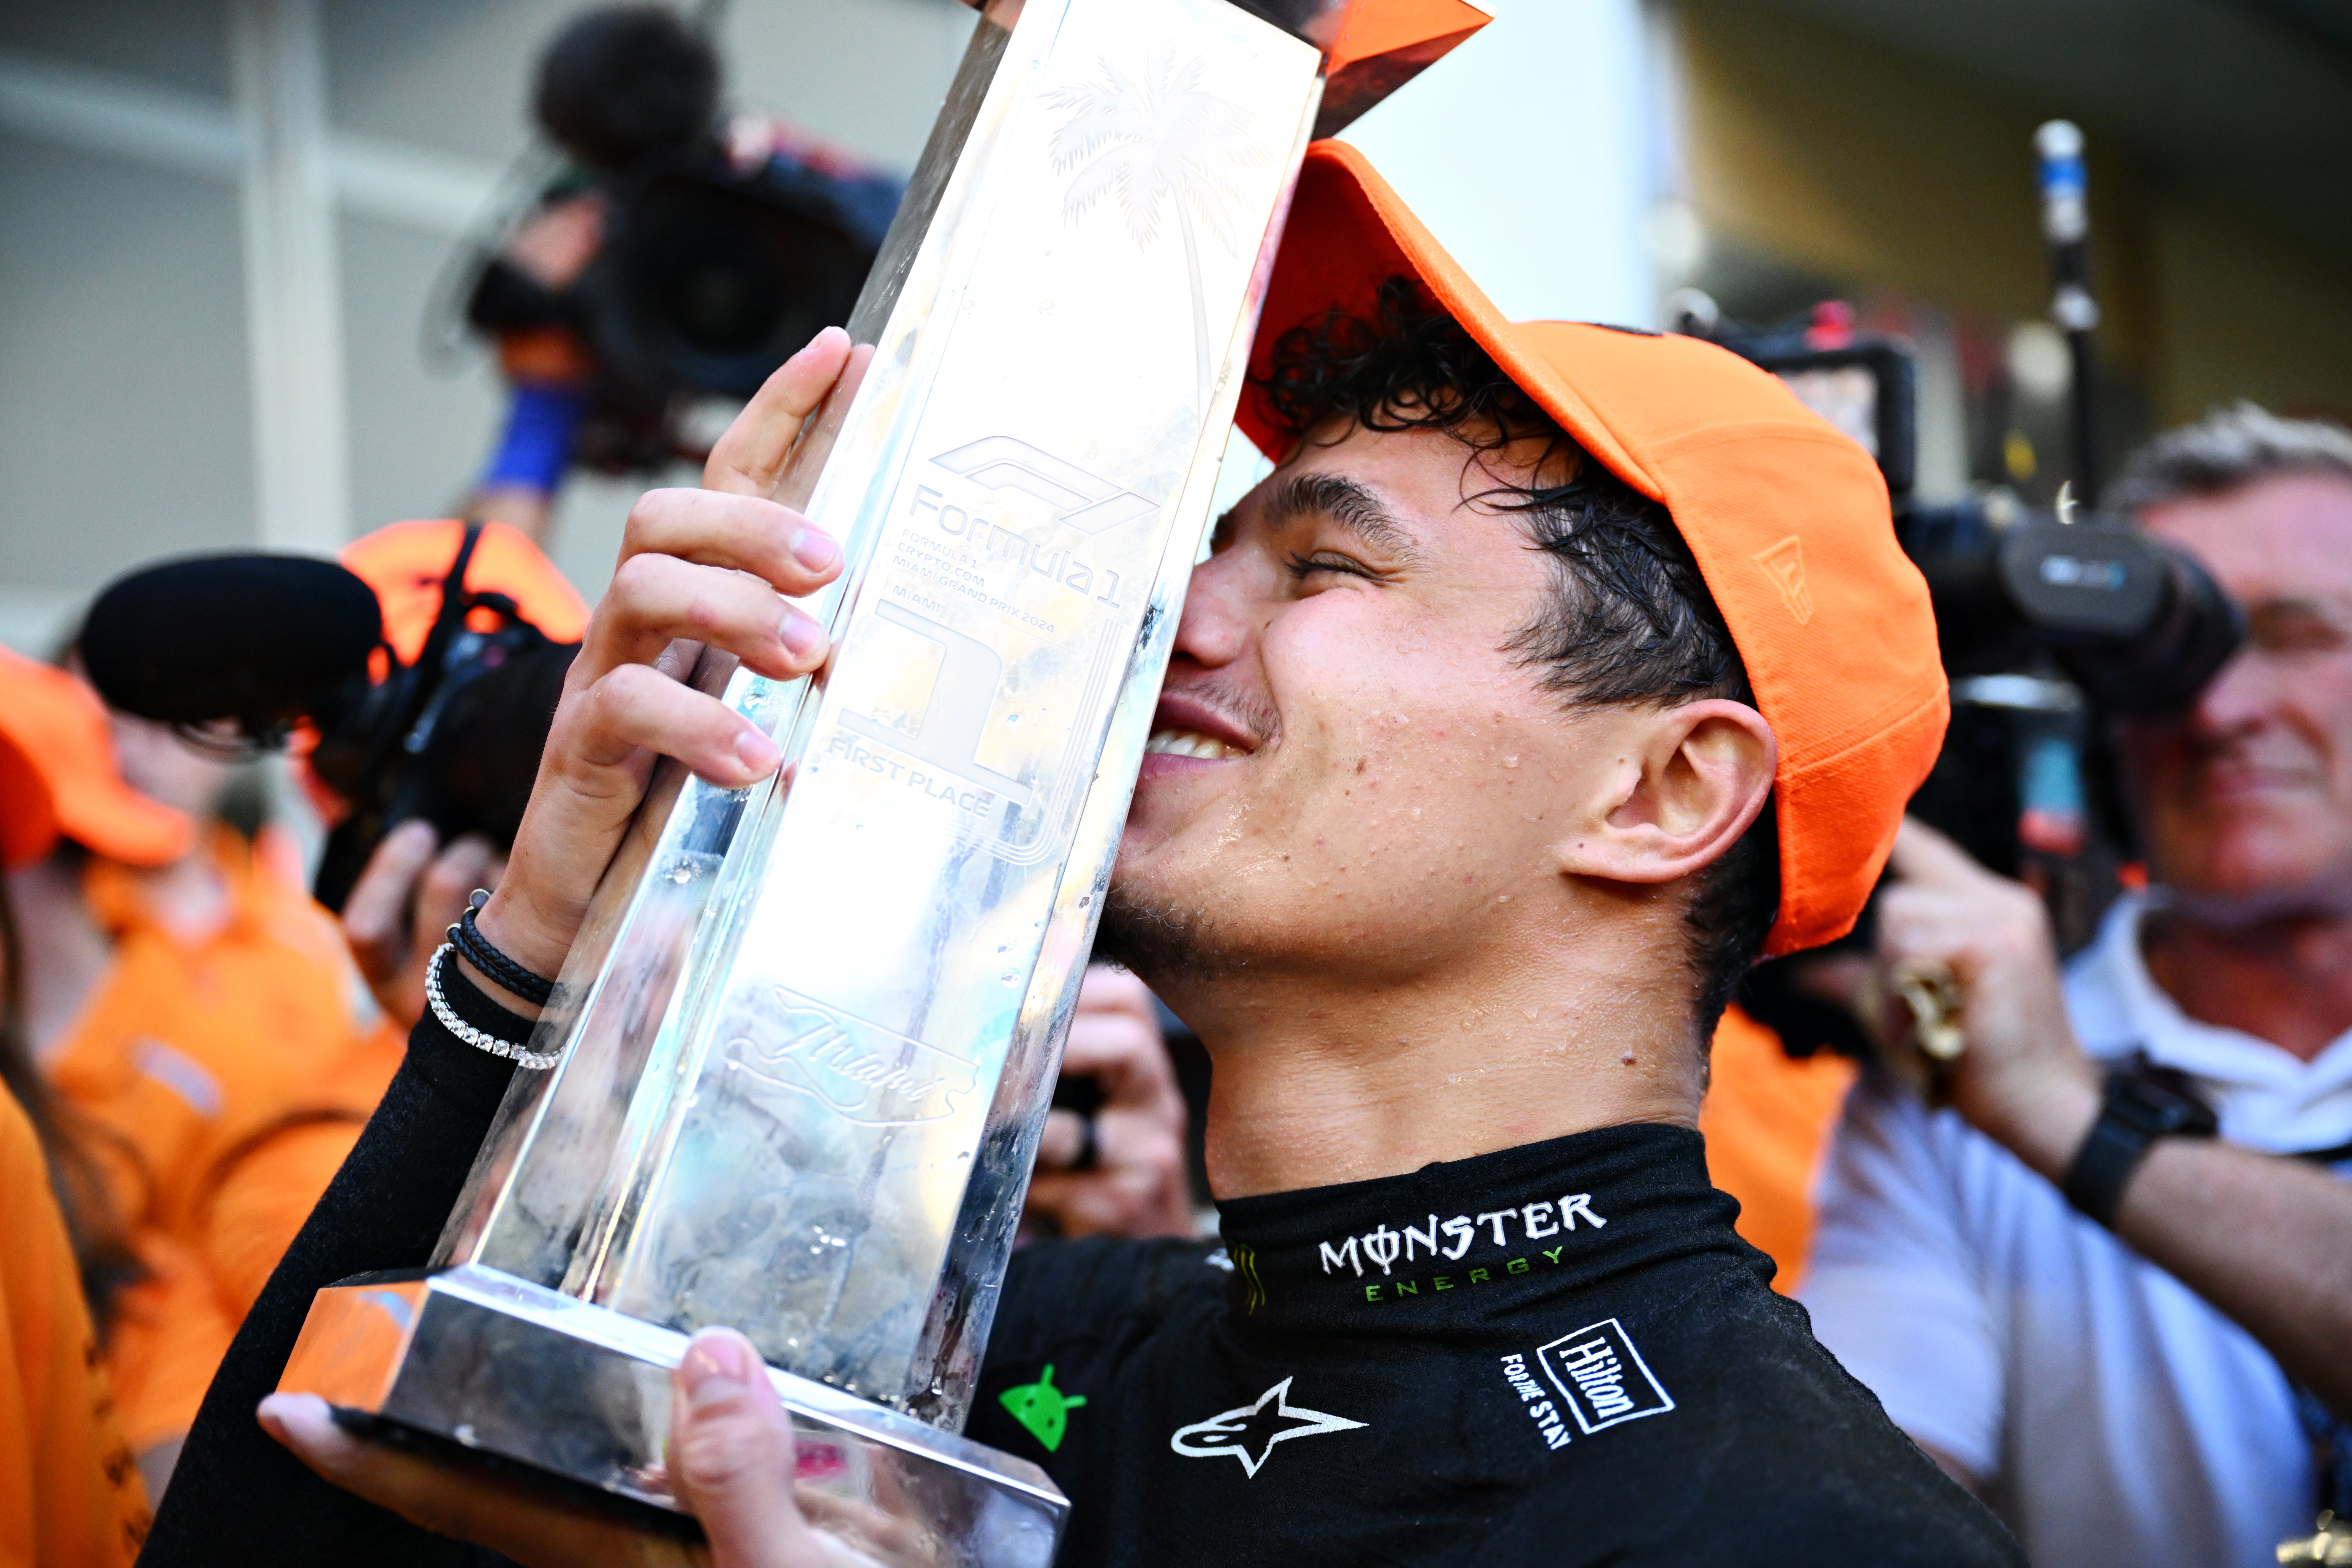 Lando Norris won his first F1 race in Miami on Sunday